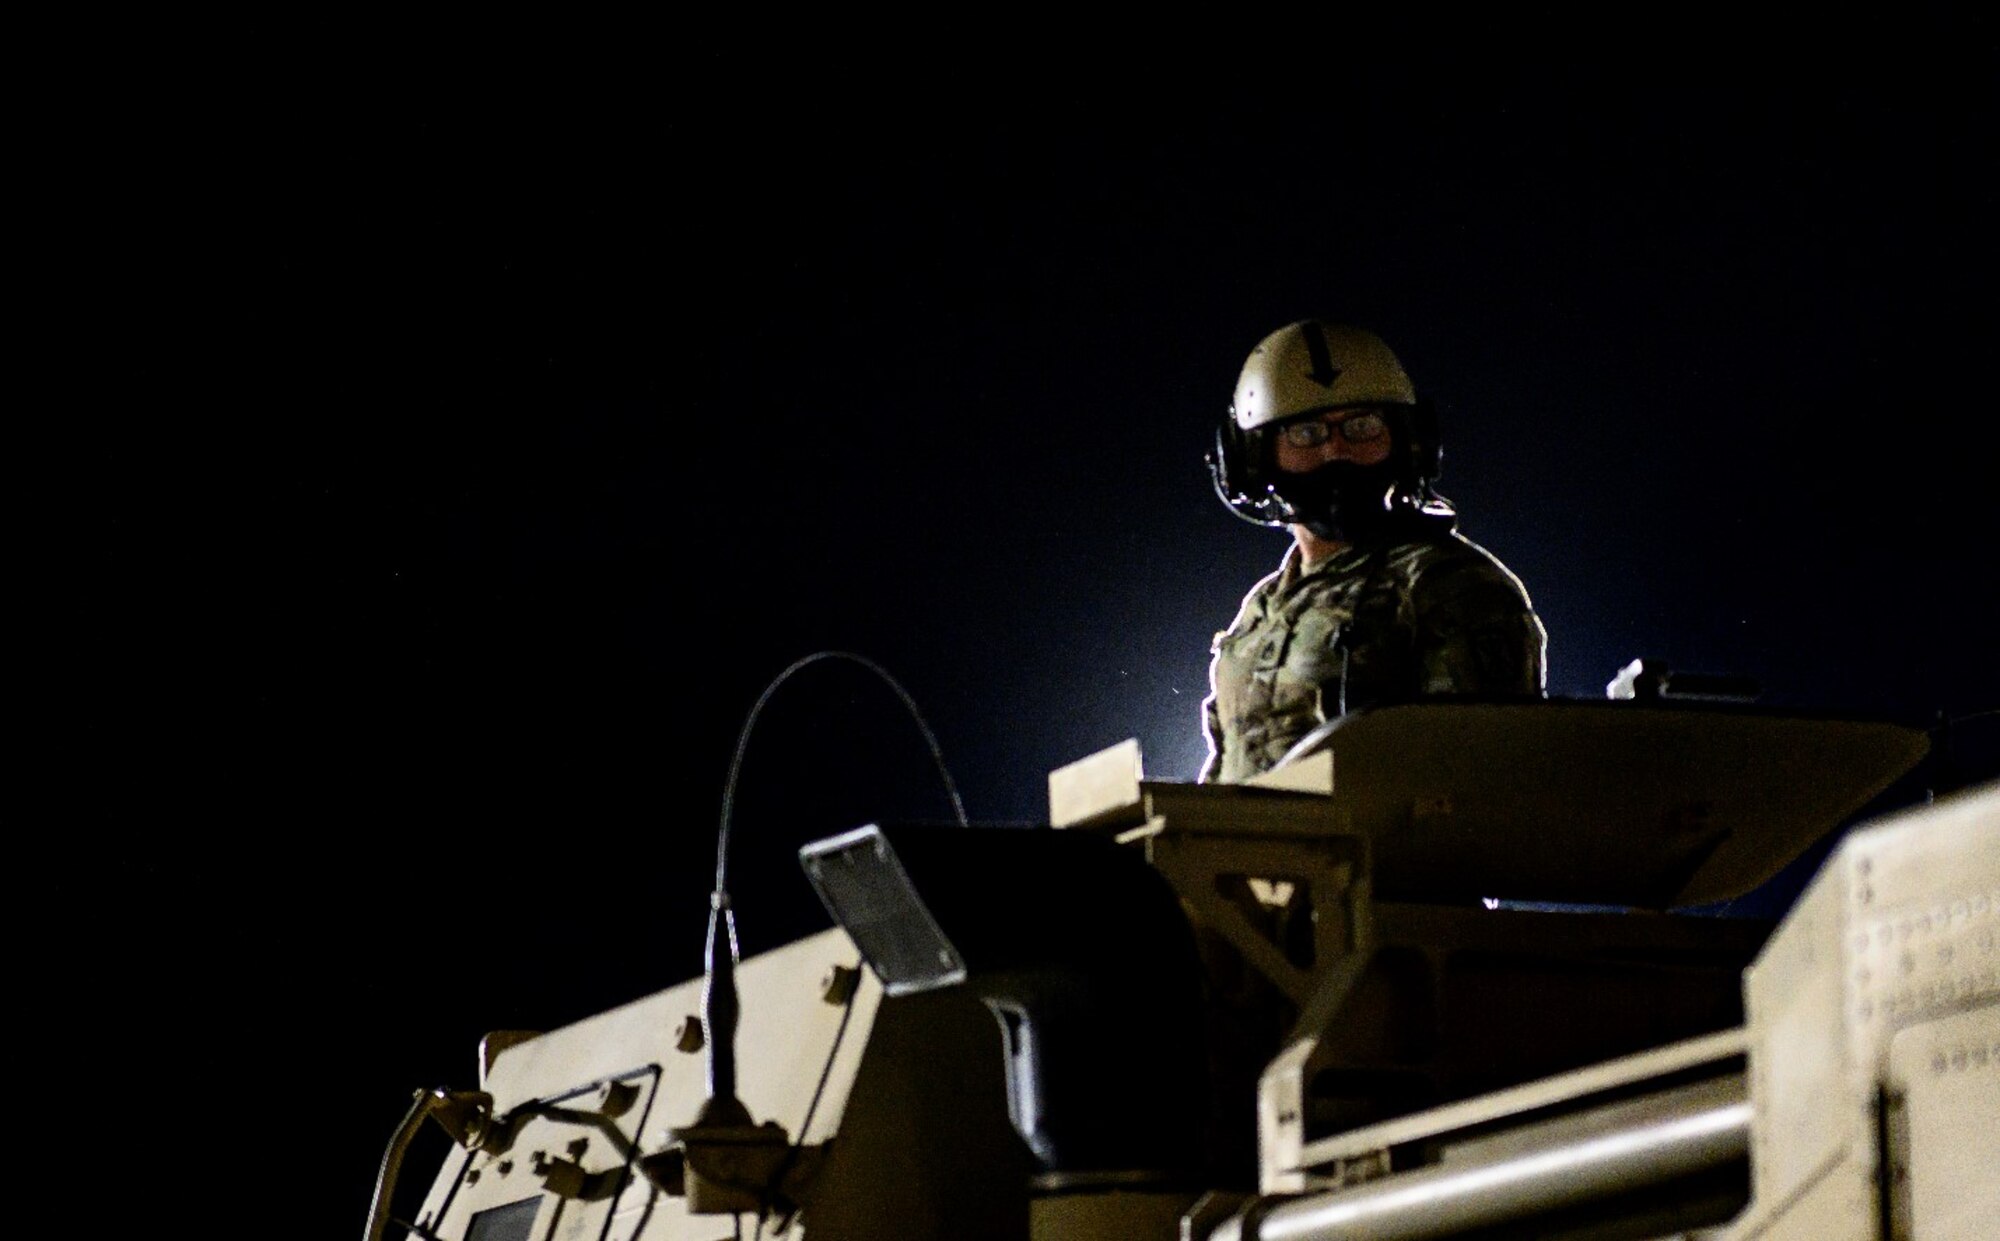 A U.S. Army Soldier waits for direction atop a High Mobility Artillery Rocket System April 27, 2021, at Mountain Home Air Force Base, Idaho. The HIMARS was used both as a simulated offensive capability as part of exercise Rainier War and as a means of training for various air mobility units who were able to familiarize the system’s configuration within cargo aircraft such as the C-17 Globemaster III.